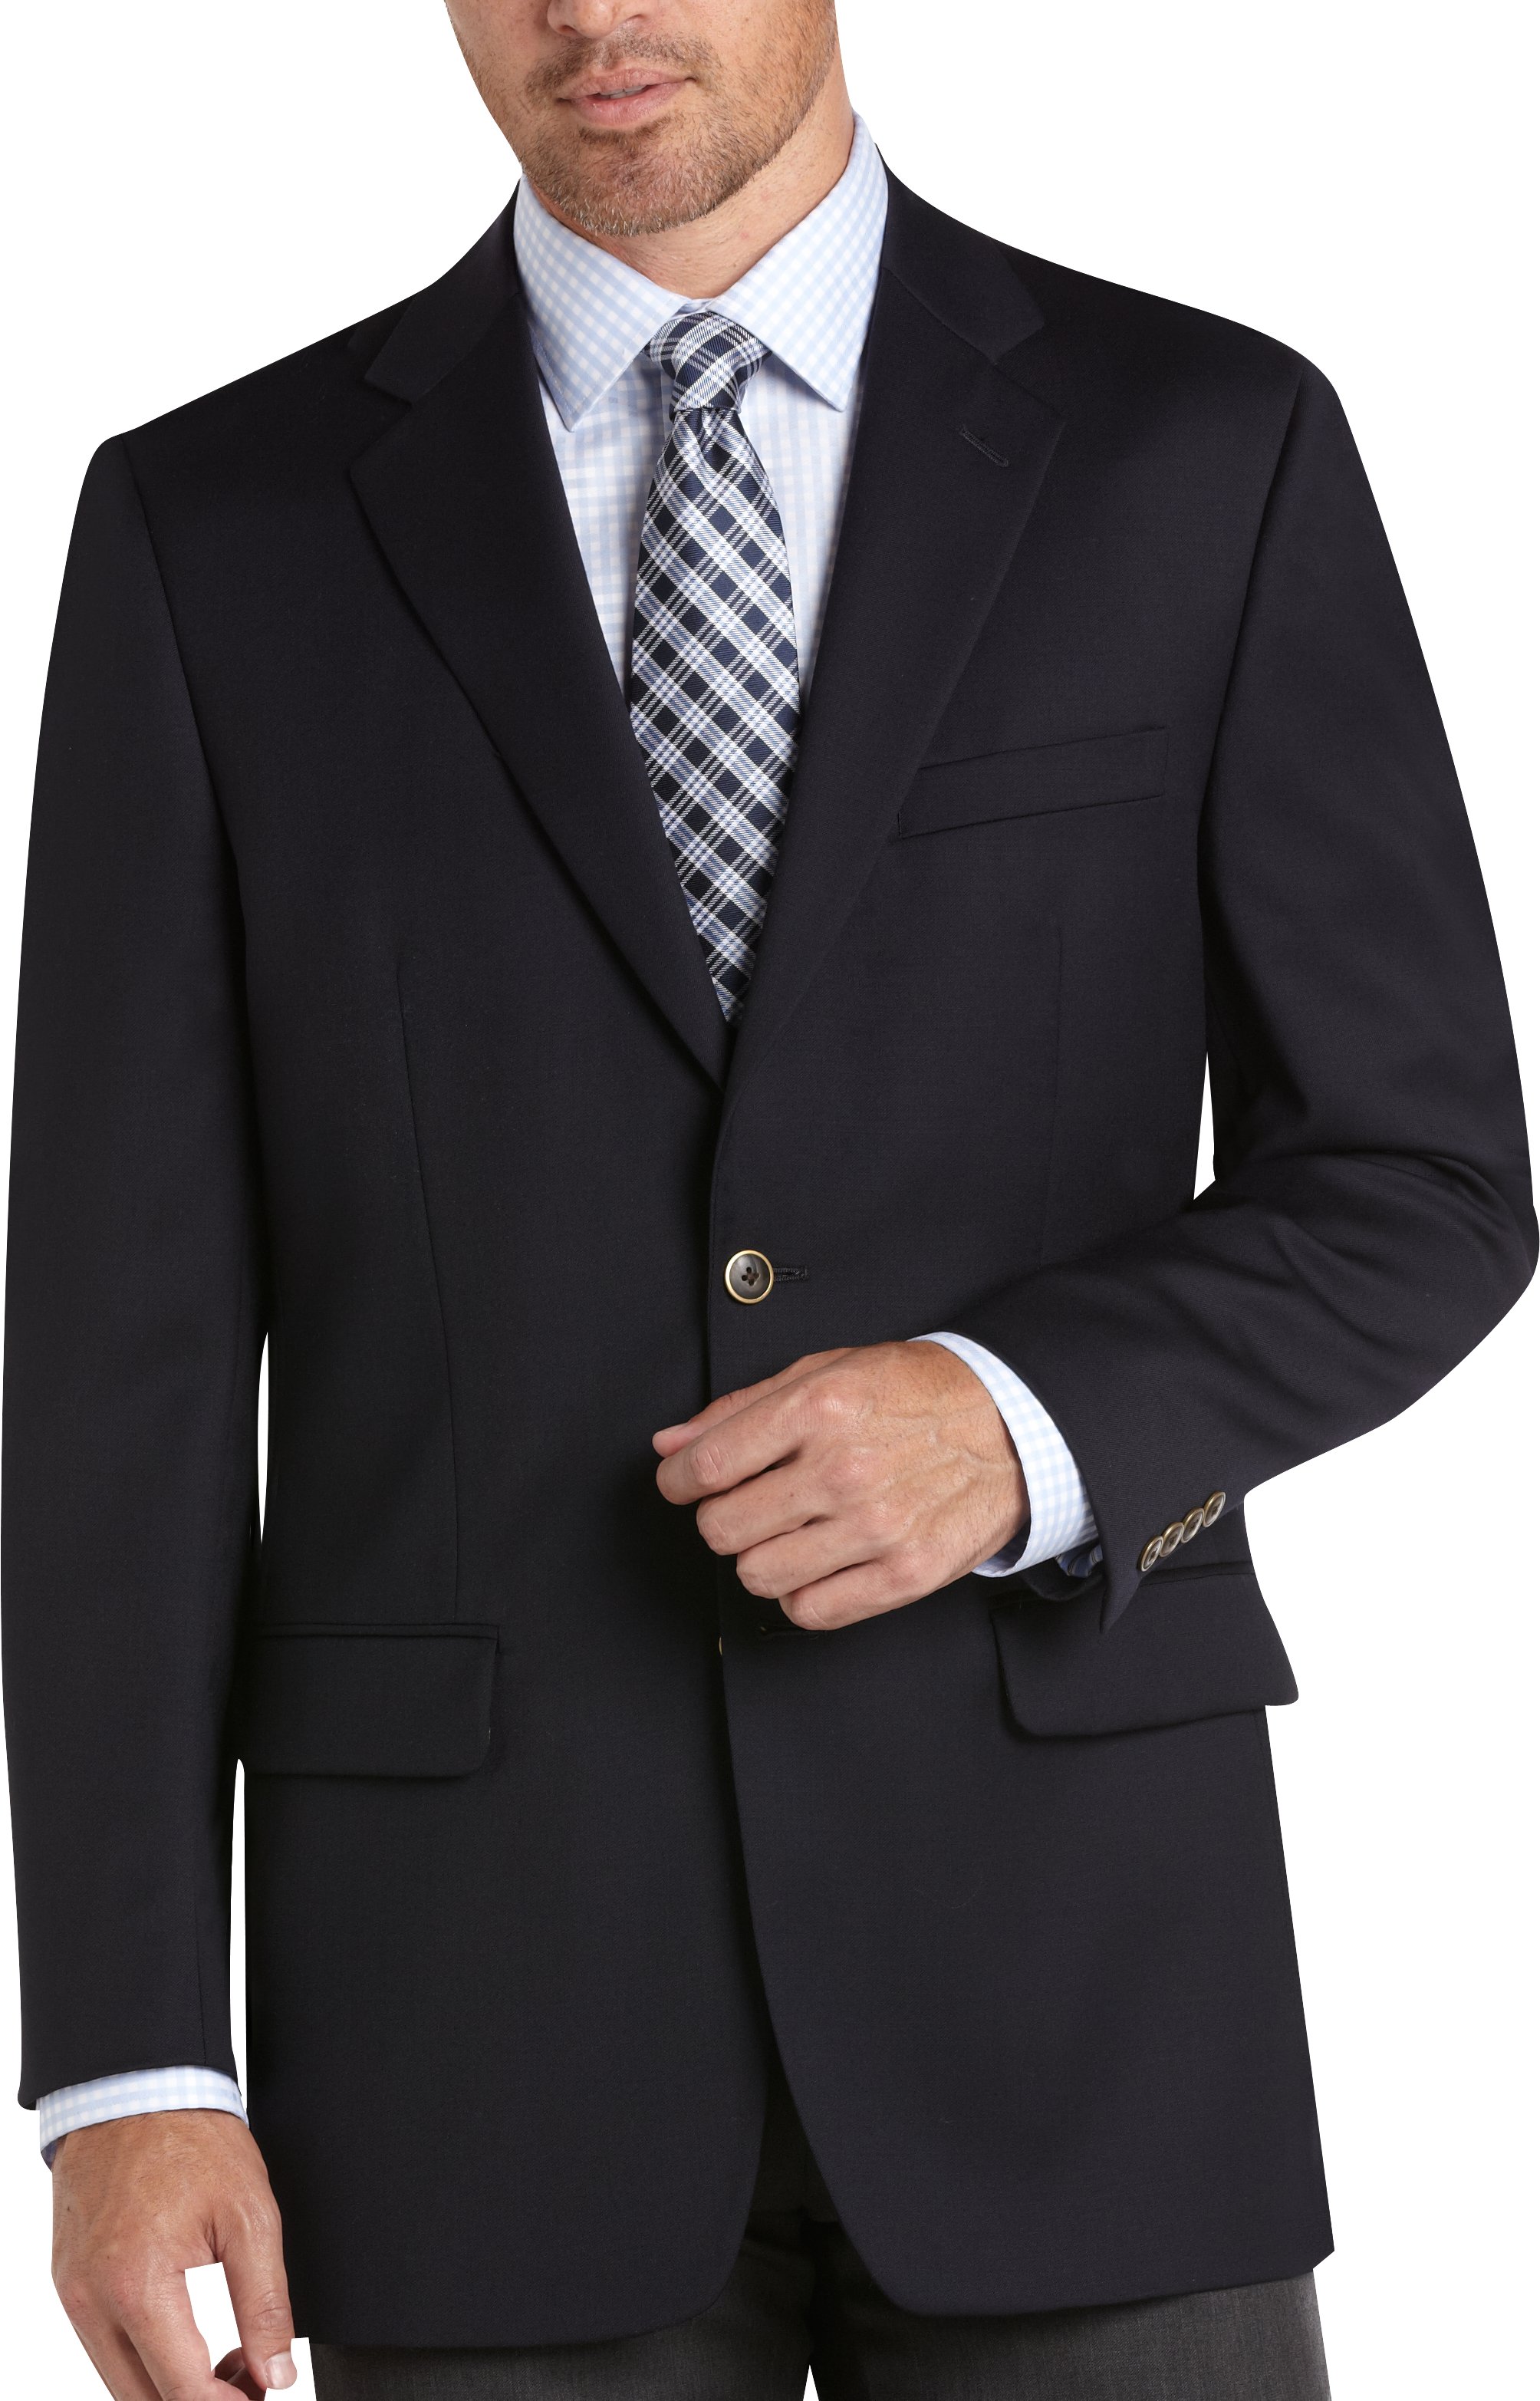 Suit Jackets For Men O13wA8